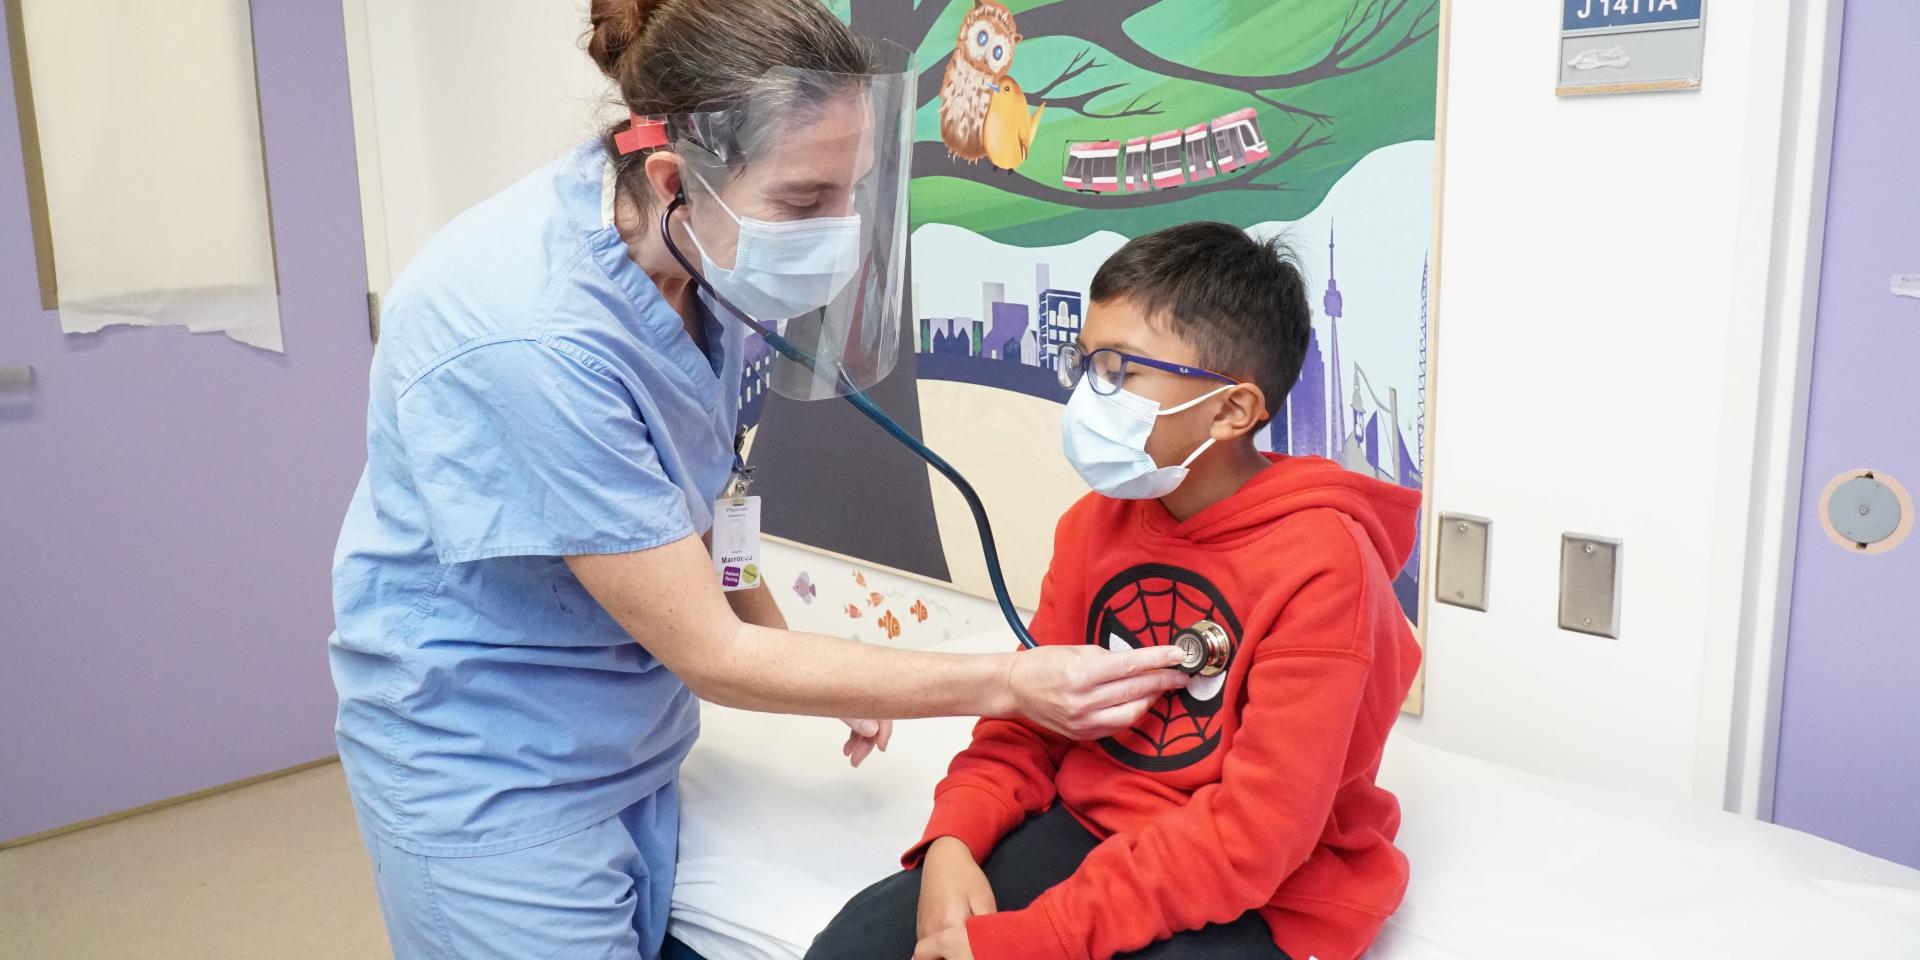 Physician in the Emergency Department helping a child 